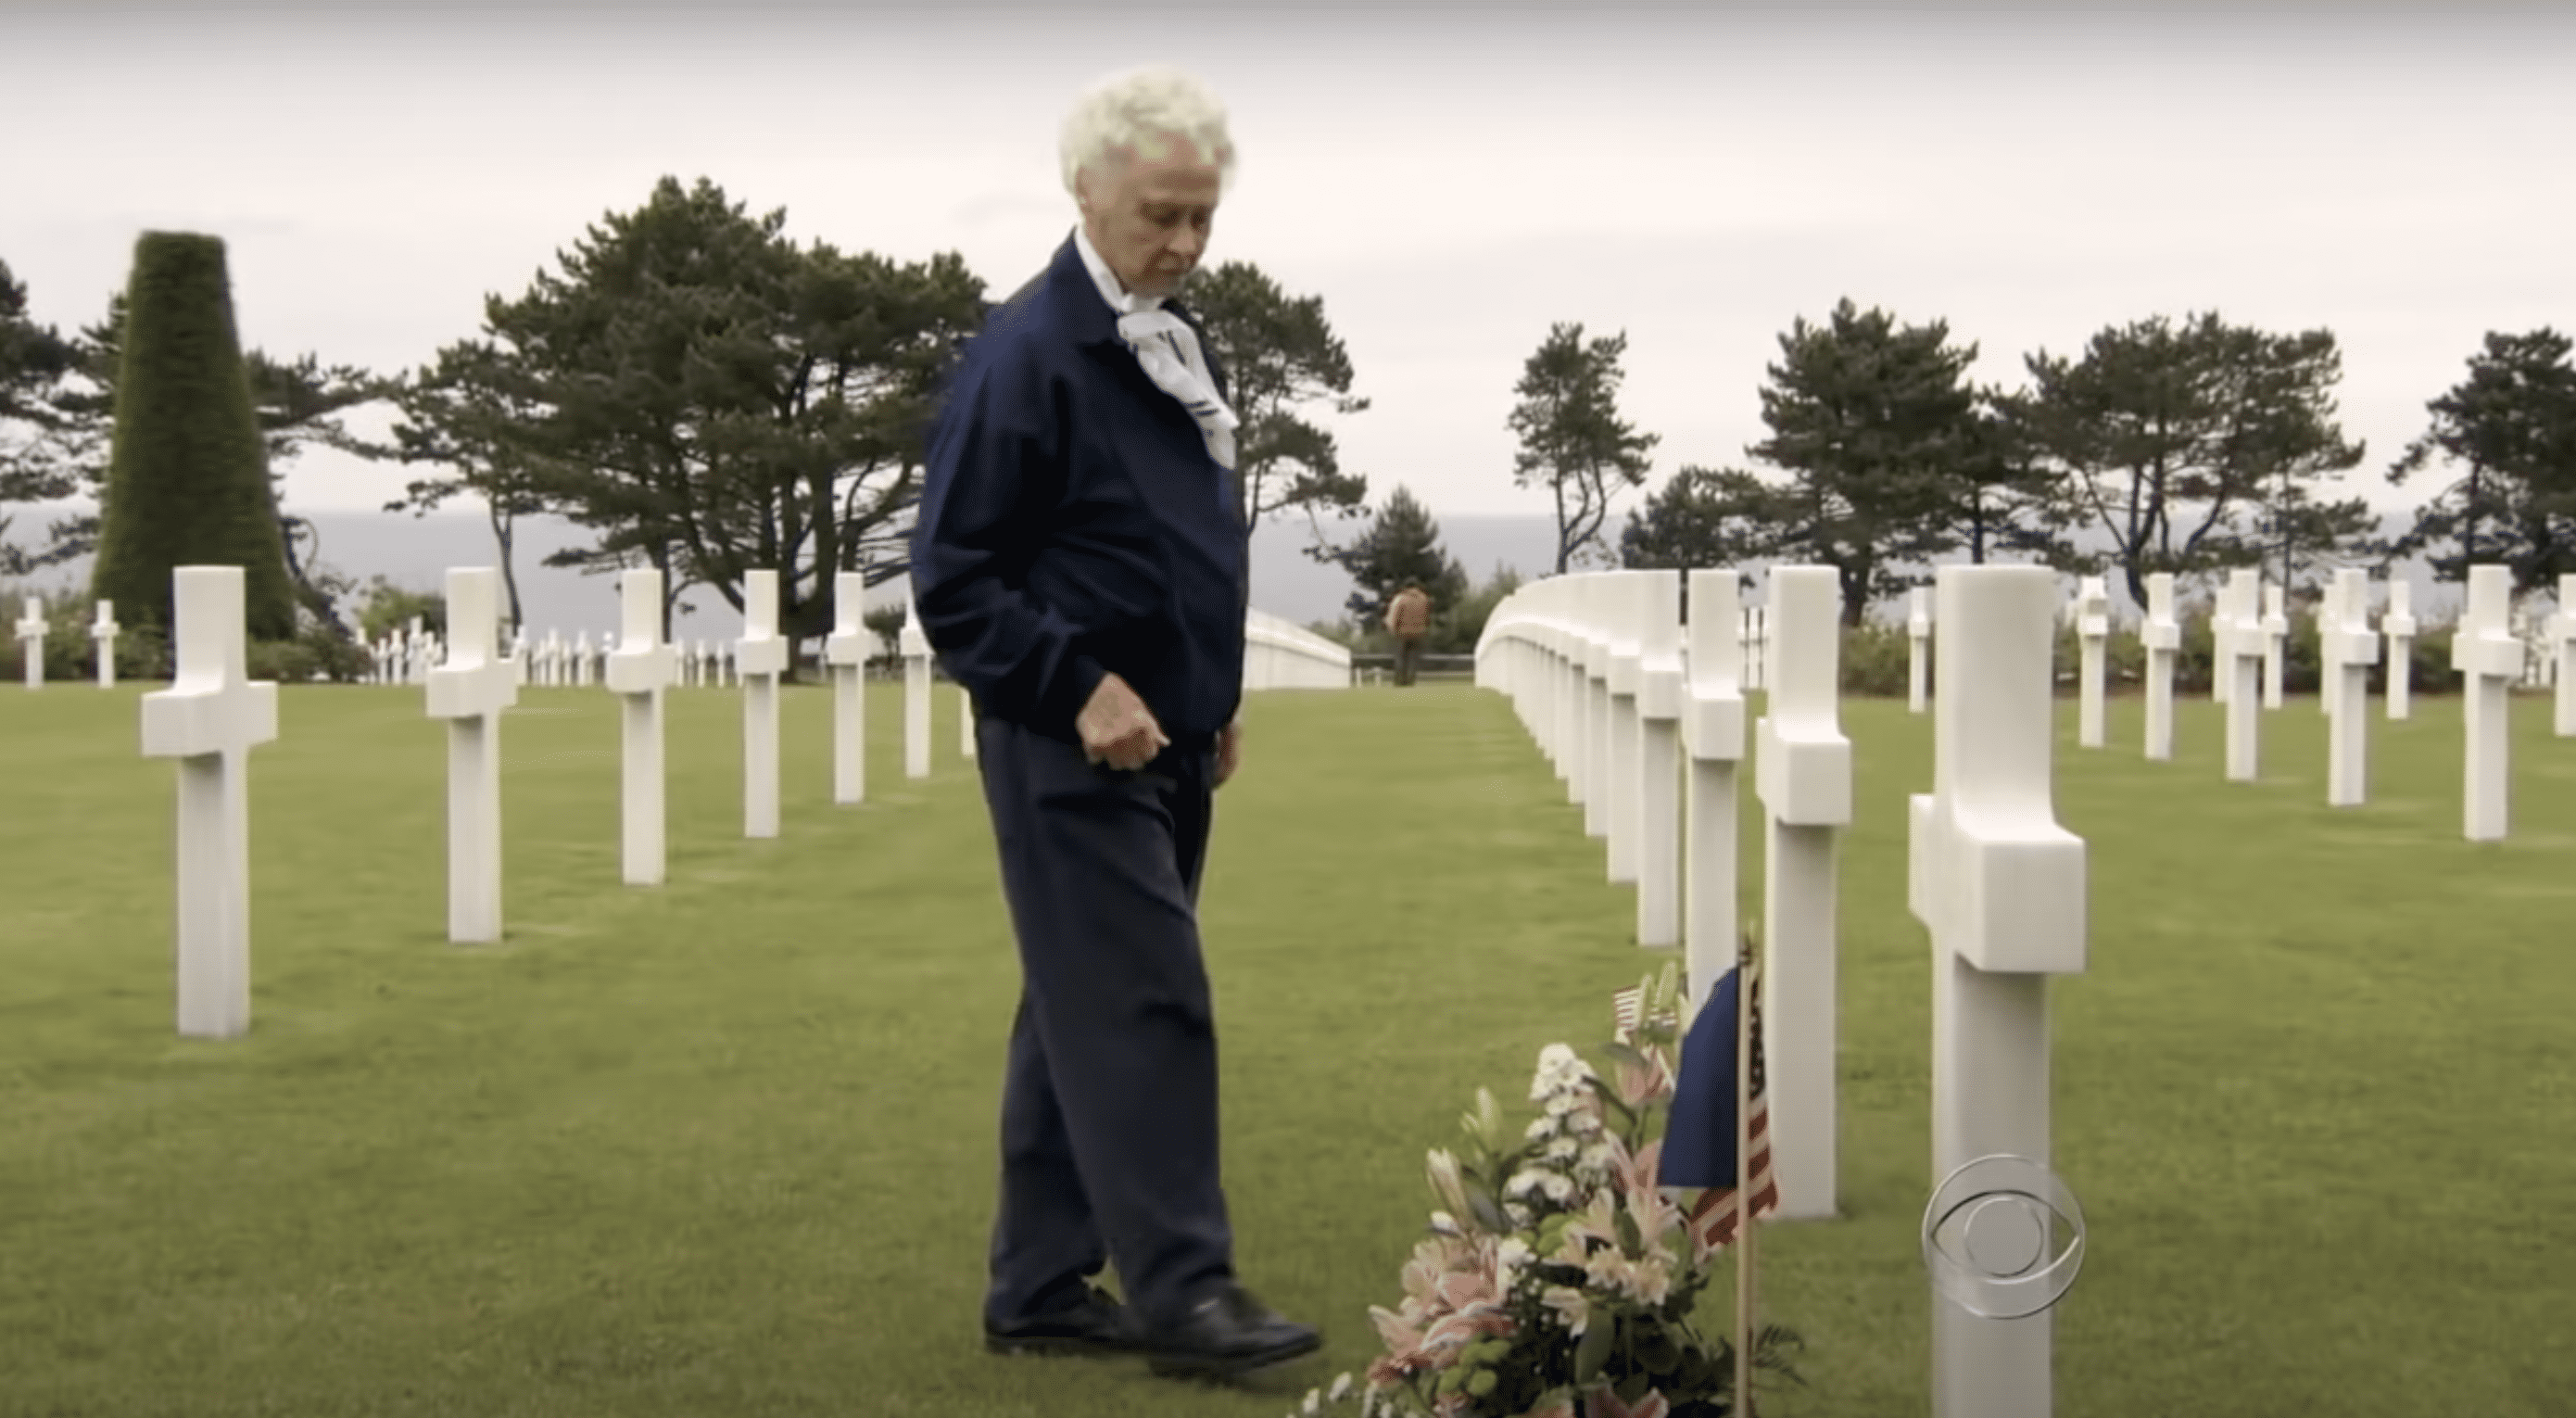 Peggy Harris stand beside her late husband, Billie Harris's grave adorned with flowers. | Source: YouTube.com/CBS News